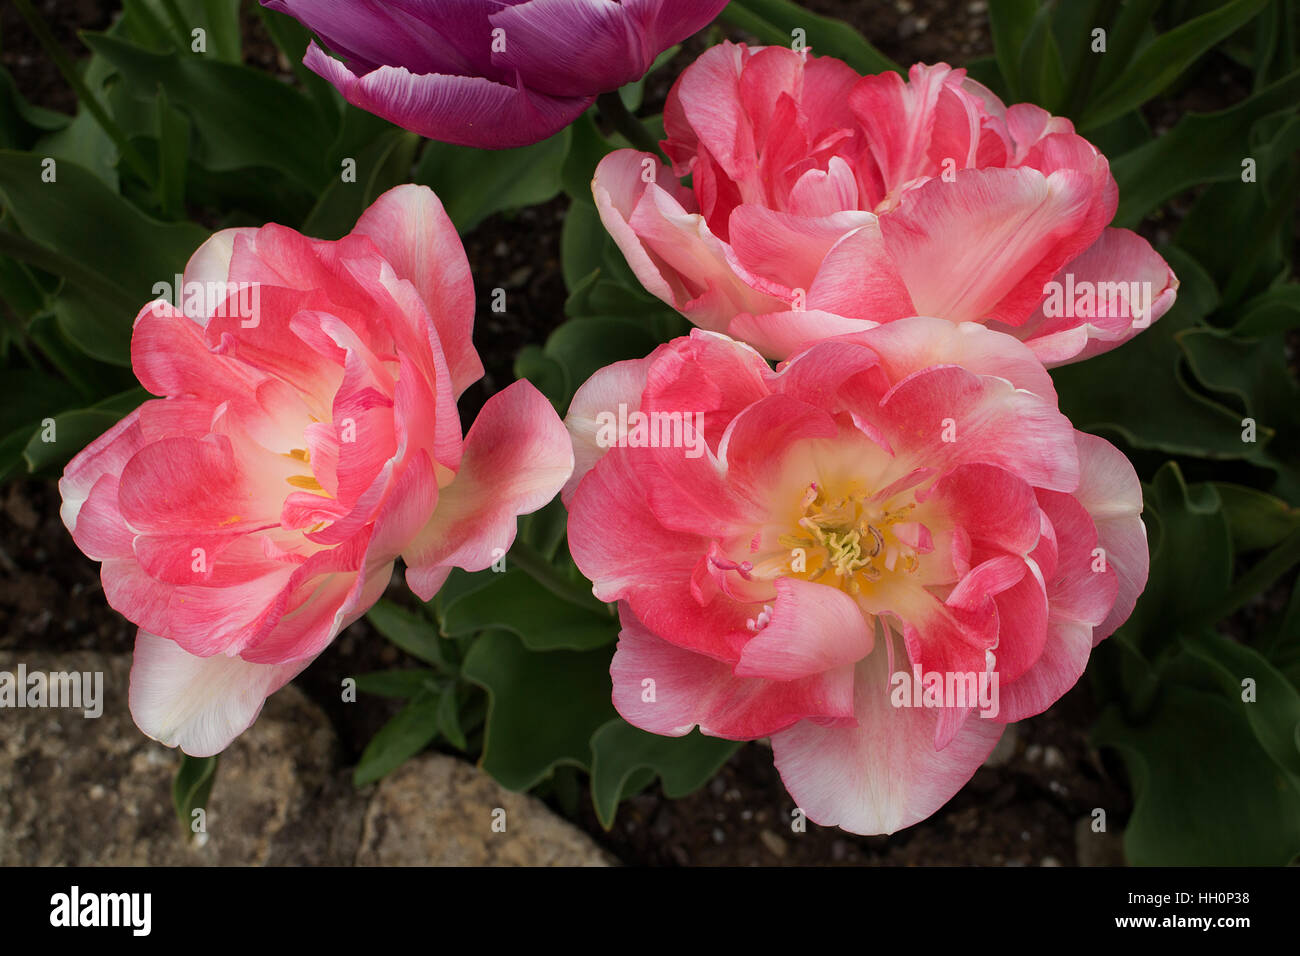 Pink tulips with flushes of cream (tulipa 'Angélique') Stock Photo